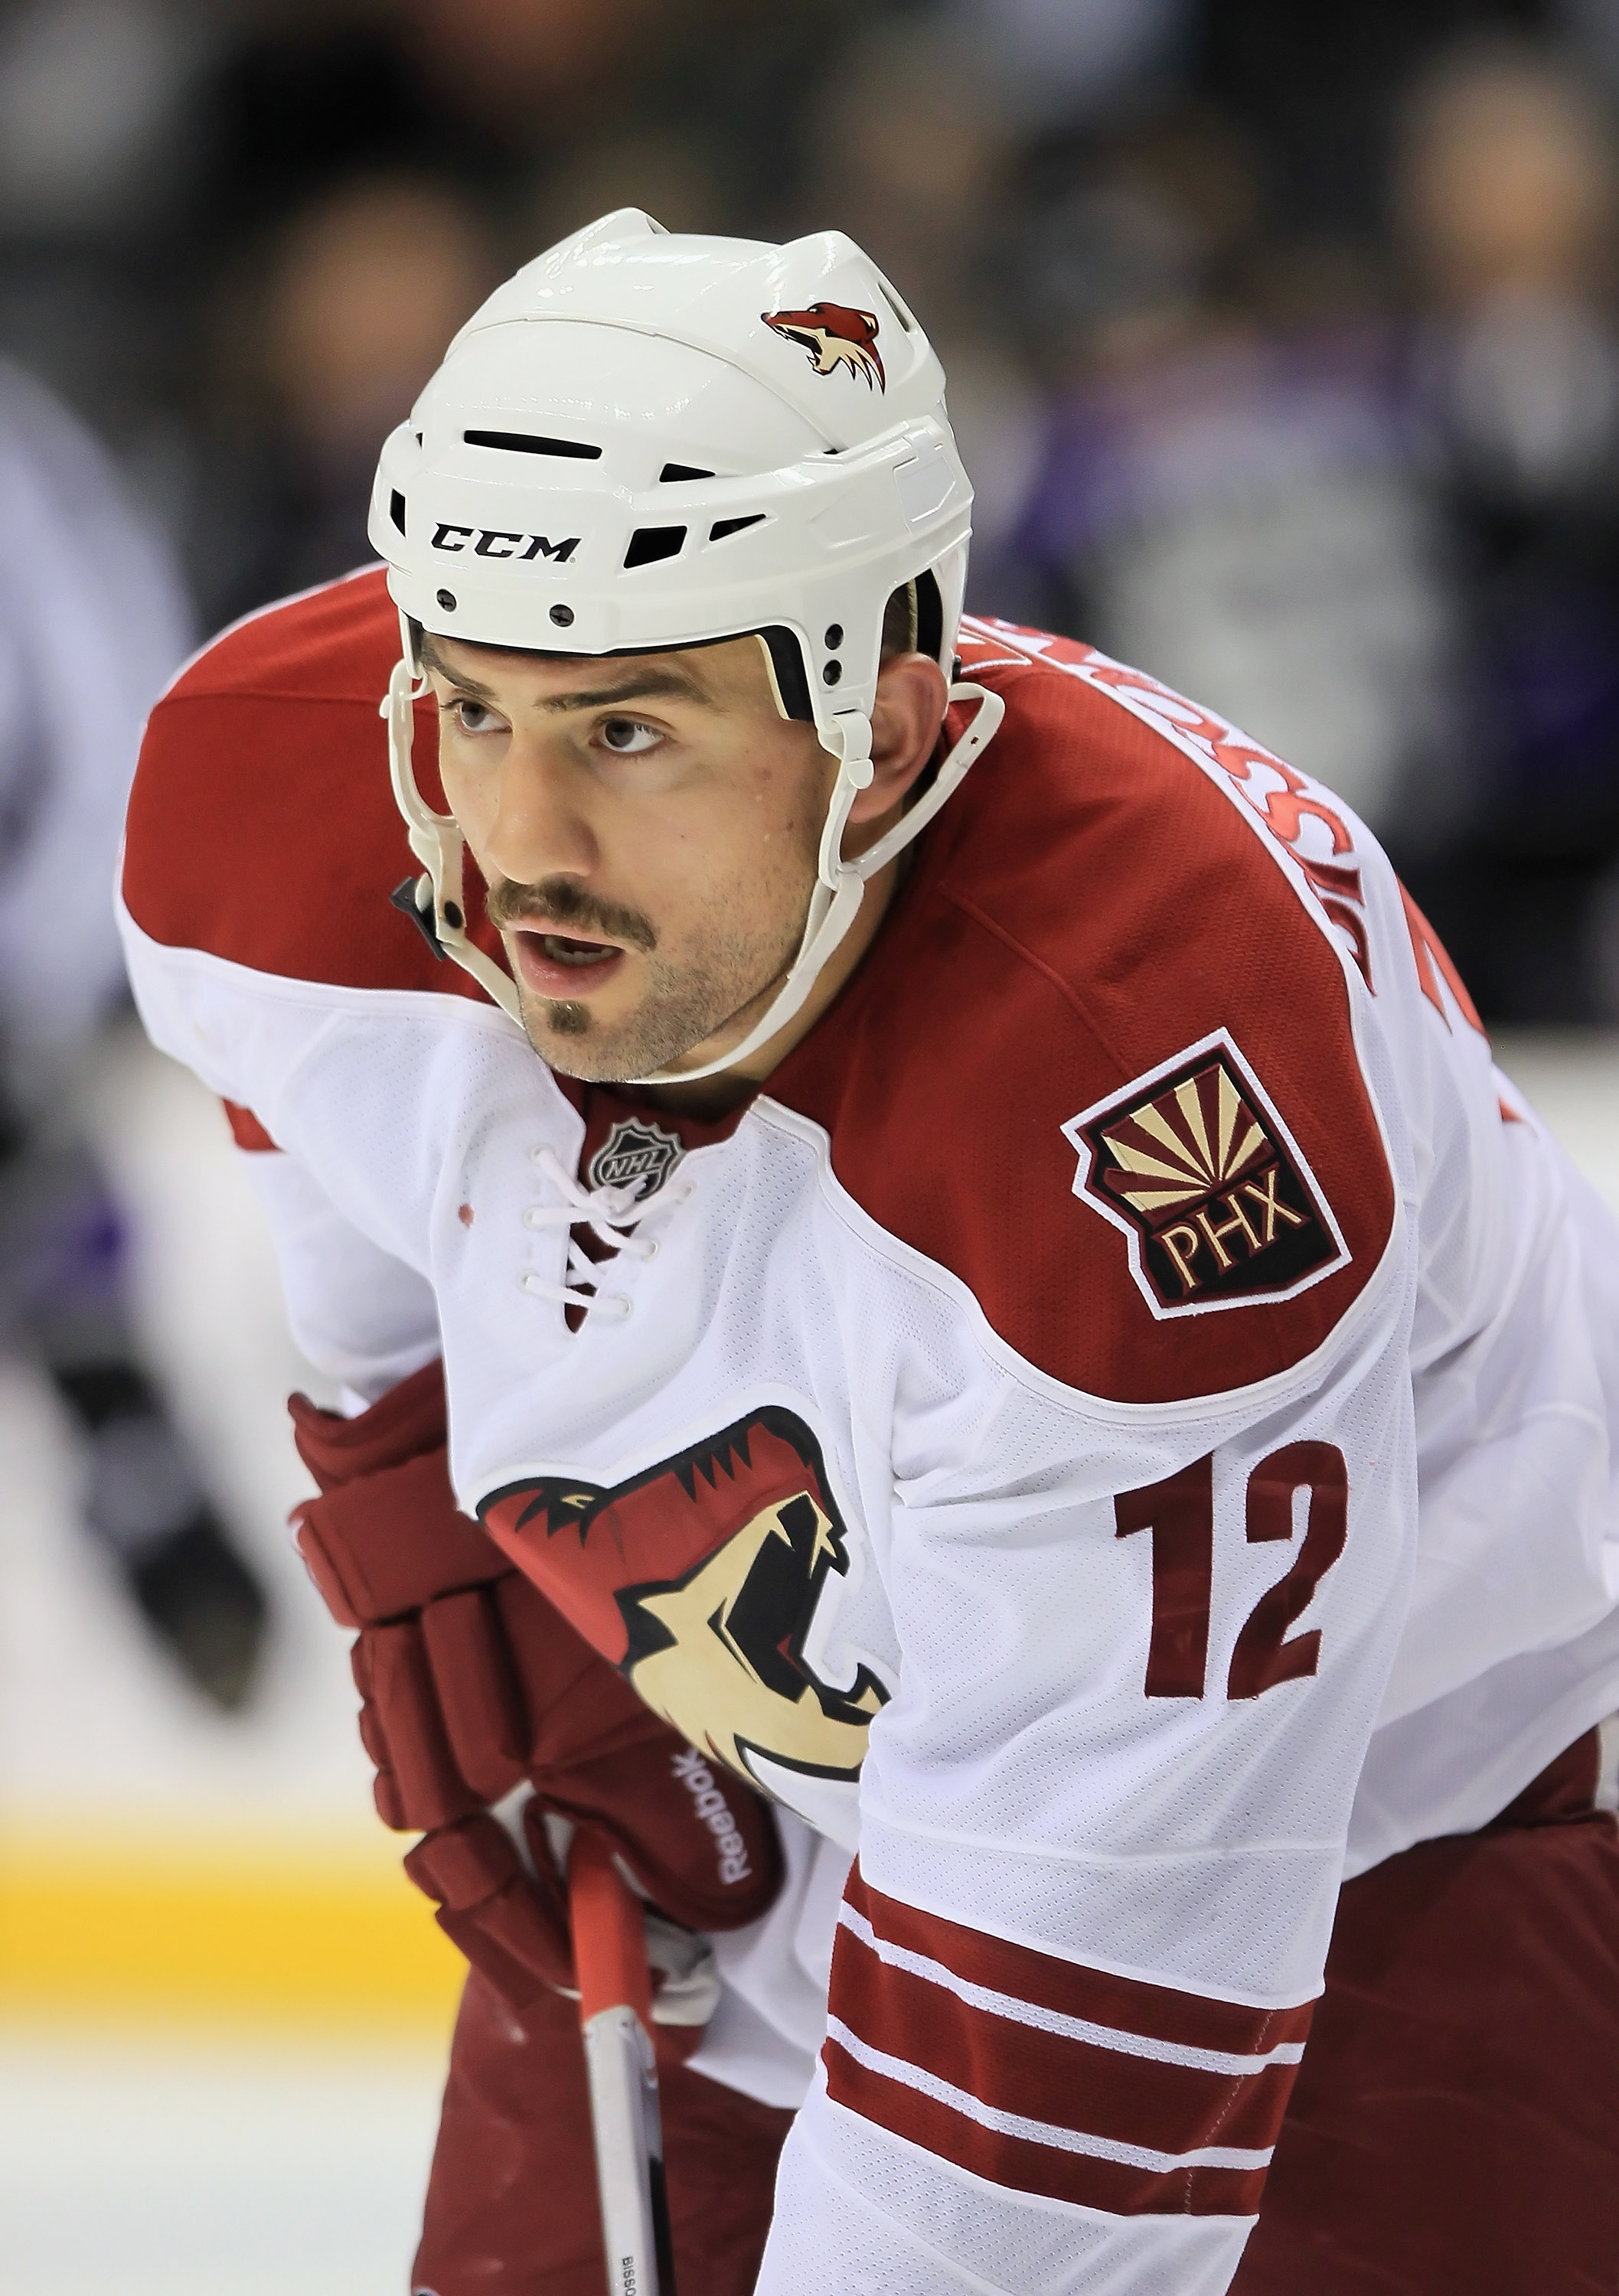 Paul Bissonnette: Bio, Stats, News & More - The Hockey Writers